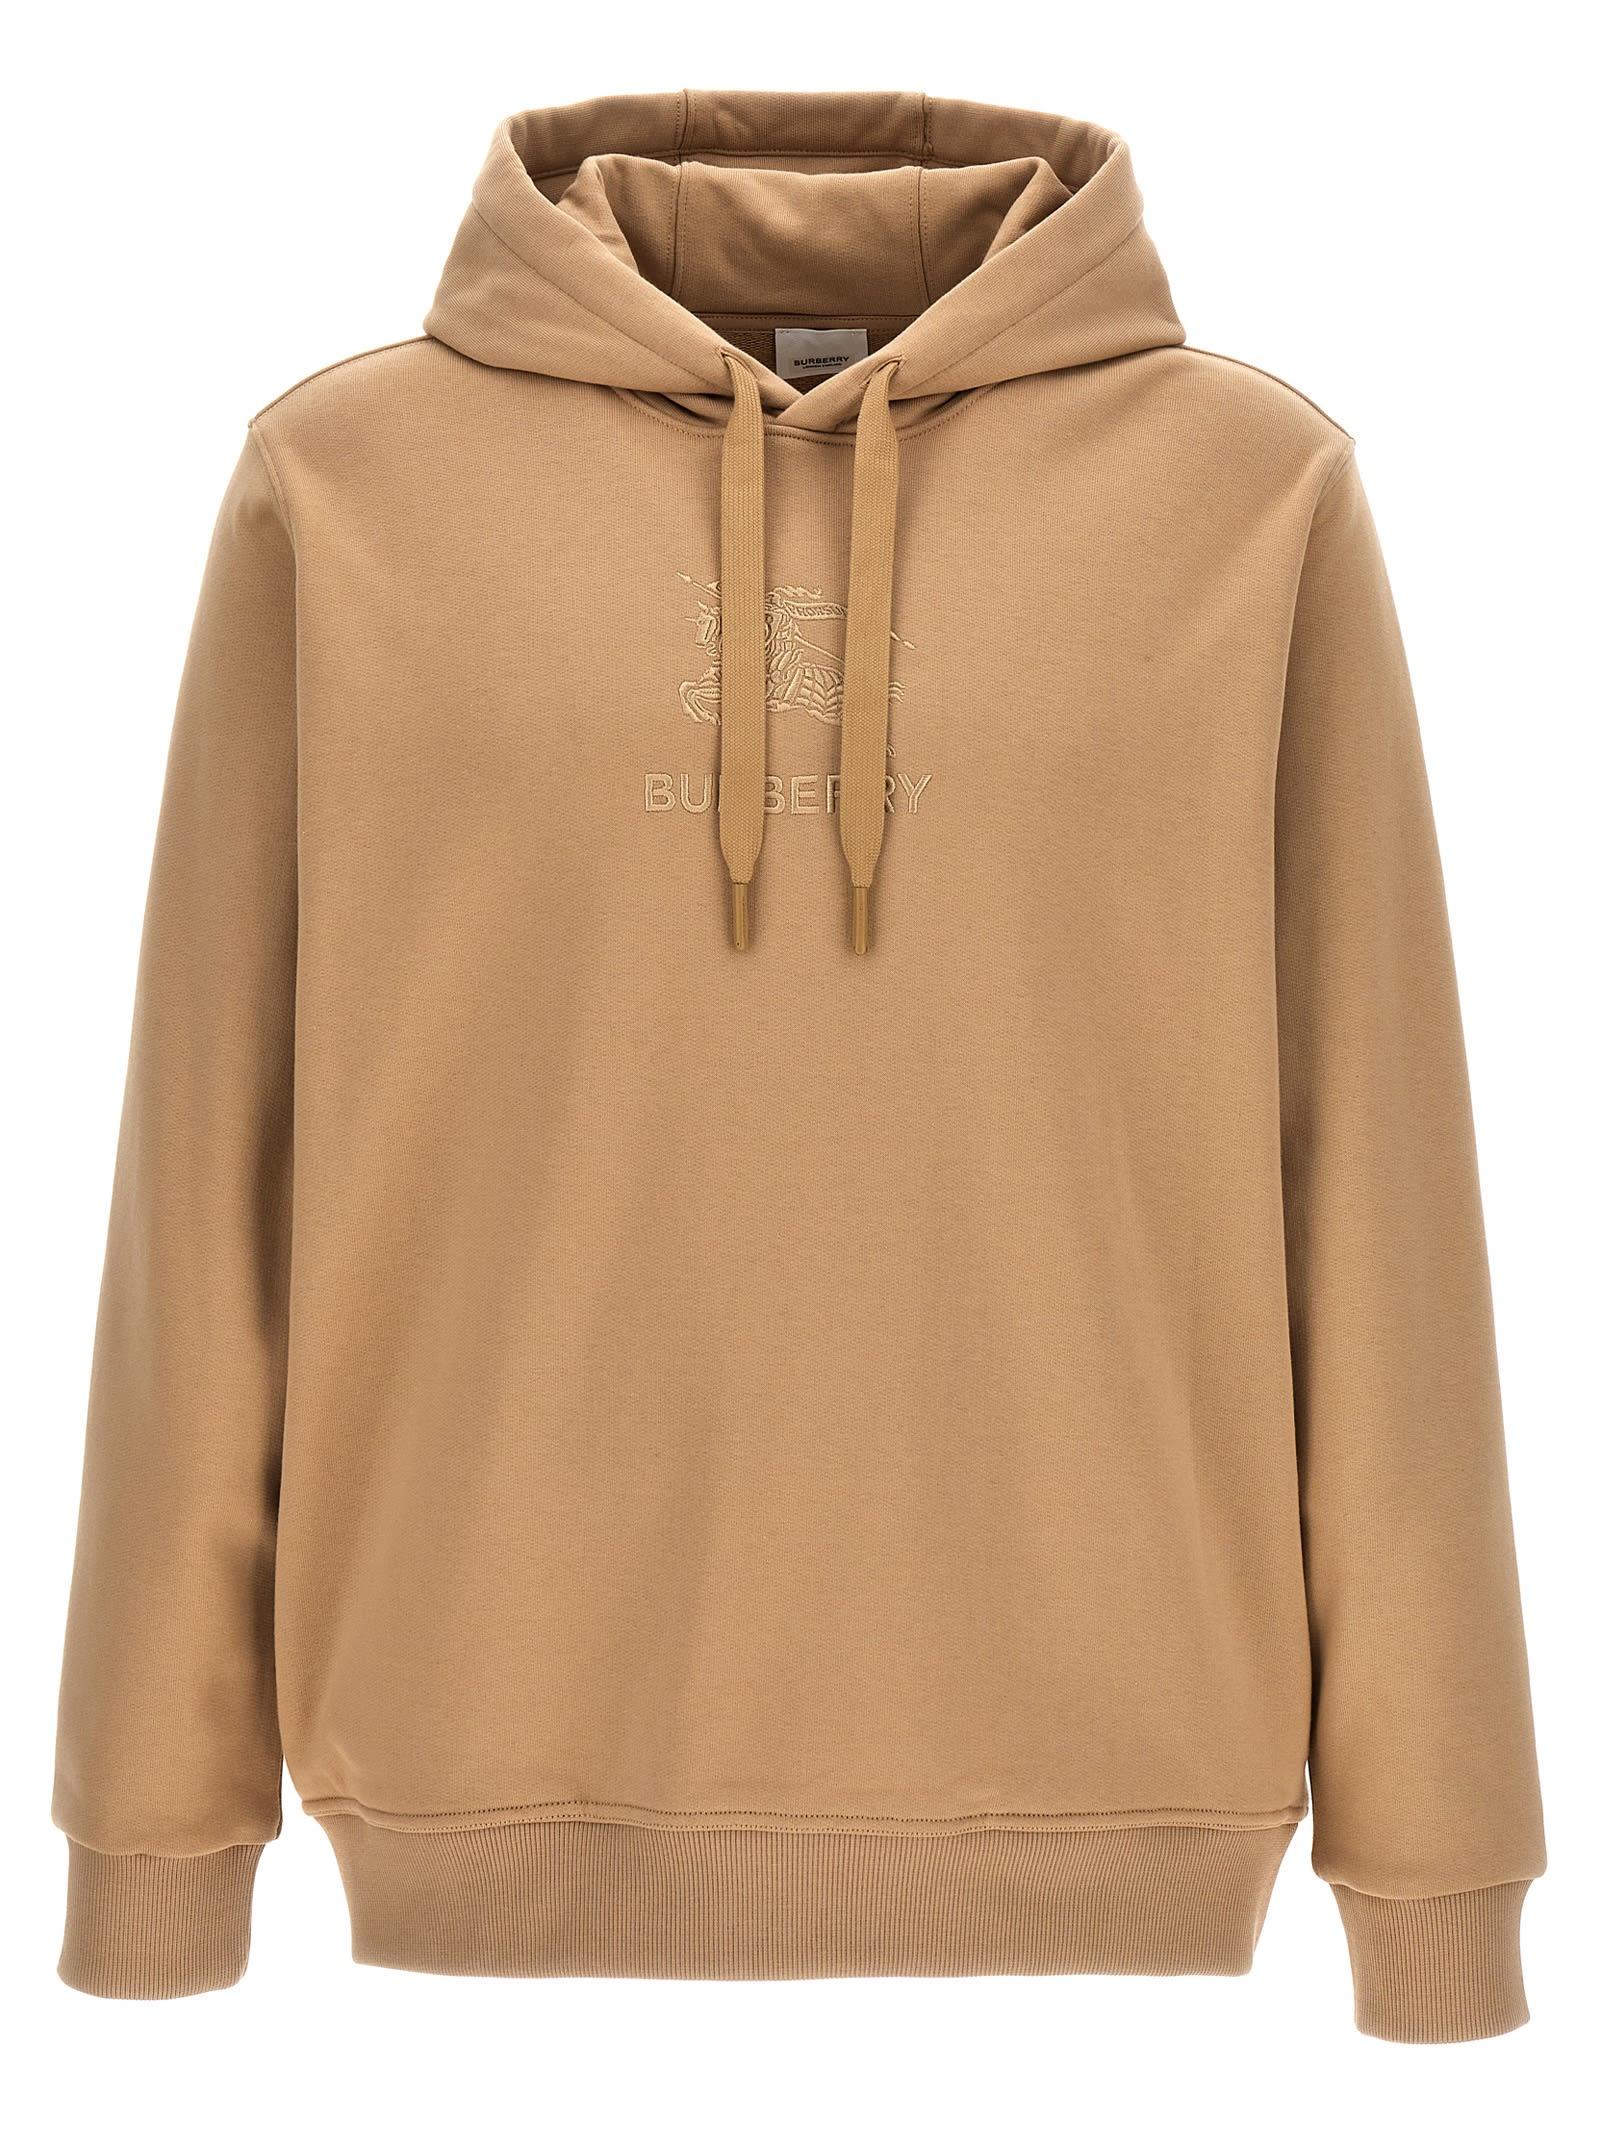 Burberry Logo Embroidery Hoodie Sweatshirt in Natural for Men | Lyst